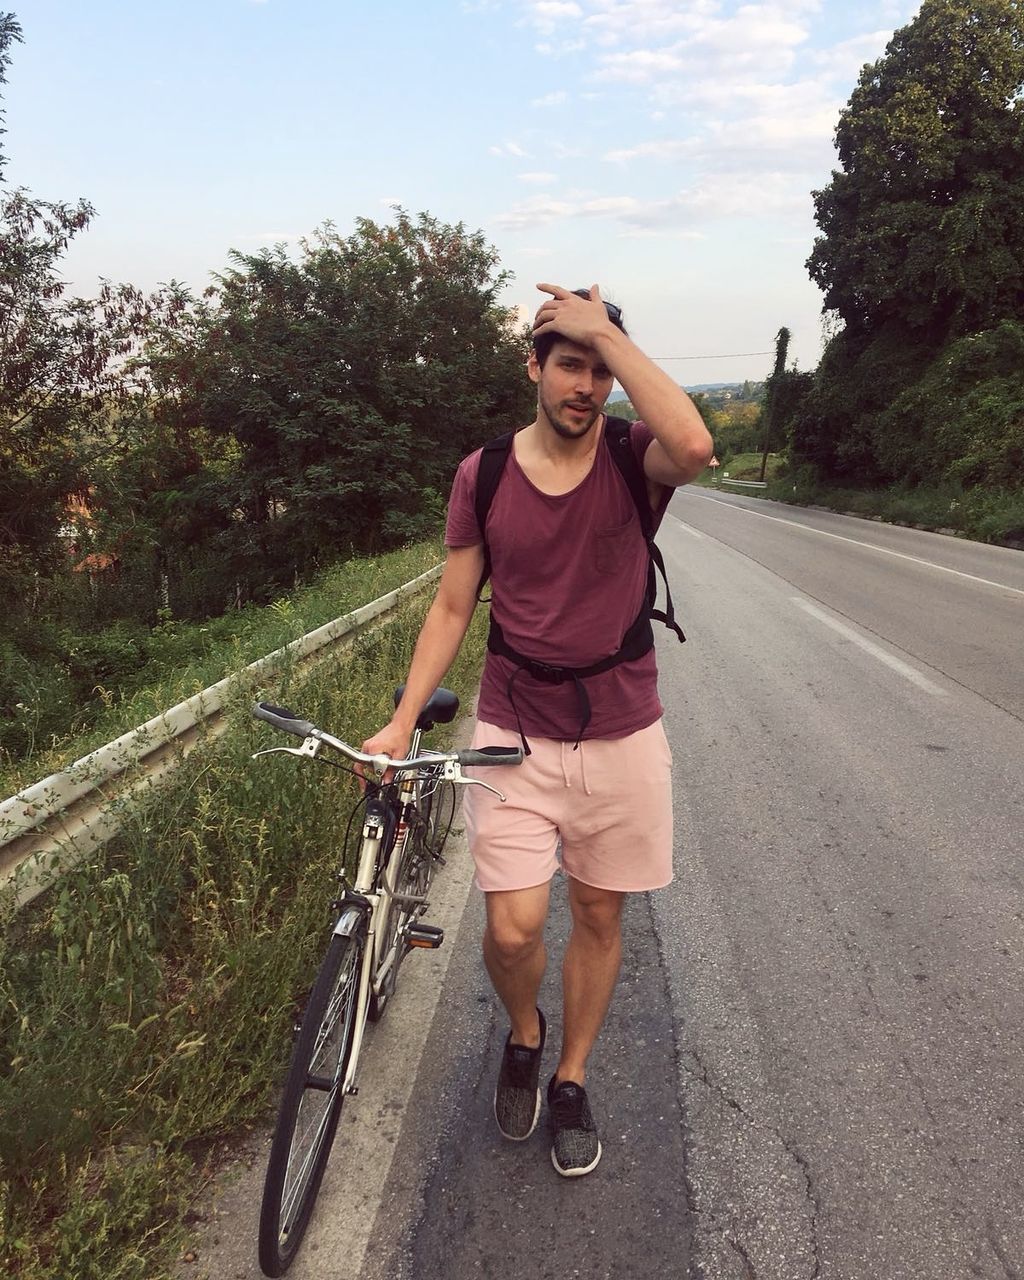 FULL LENGTH PORTRAIT OF A MAN RIDING BICYCLE ON ROAD